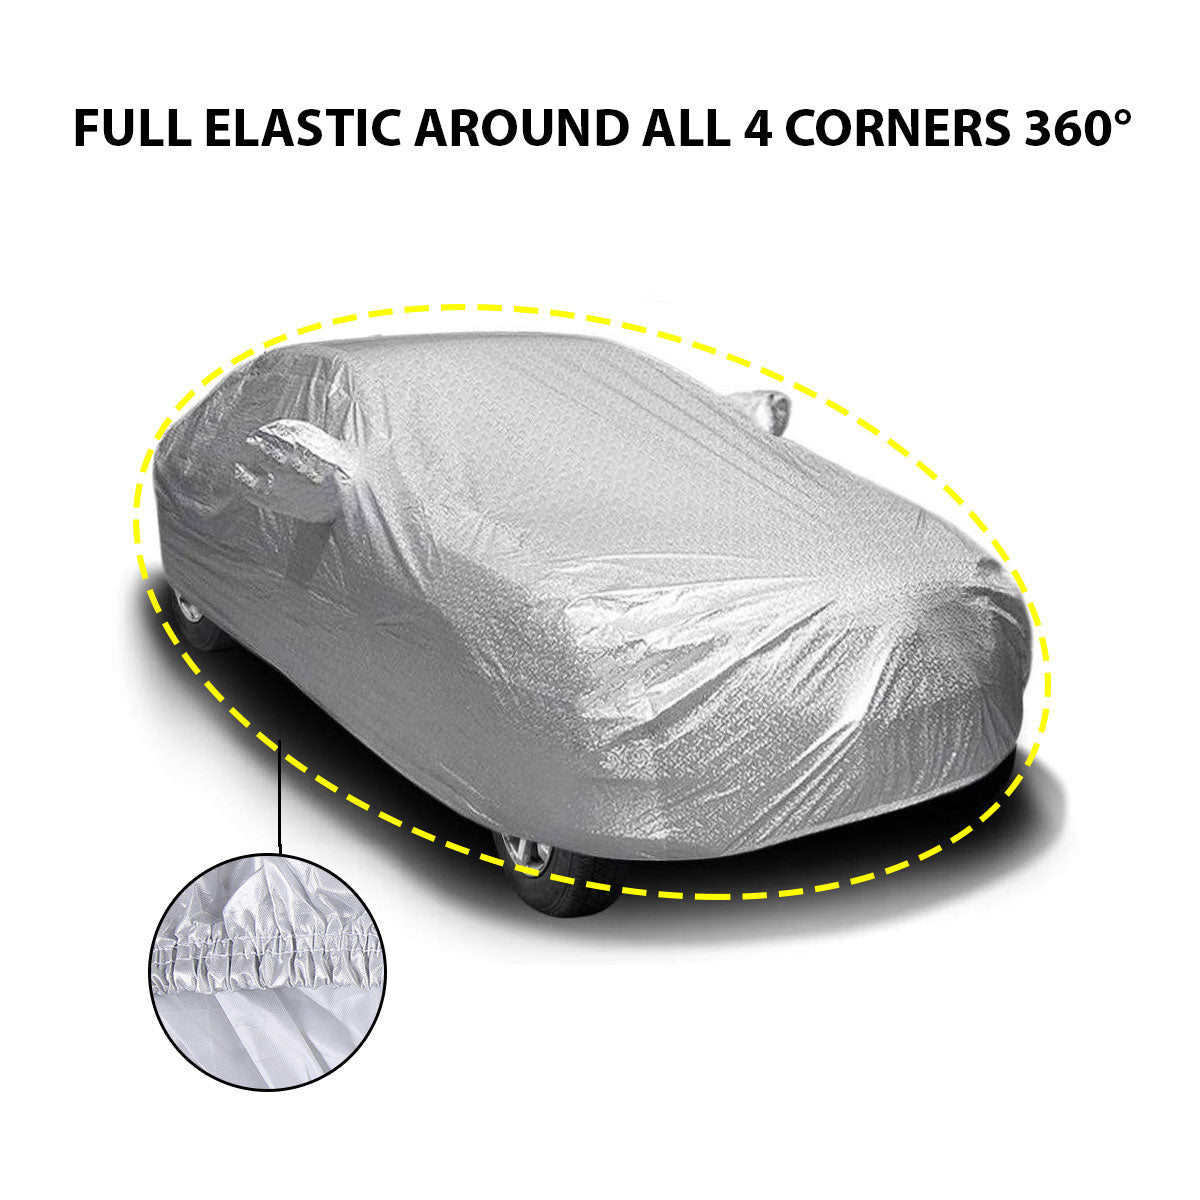 Oshotto Spyro Silver Anti Reflective, dustproof and Water Proof Car Body Cover with Mirror Pockets For Honda City 2020-2023